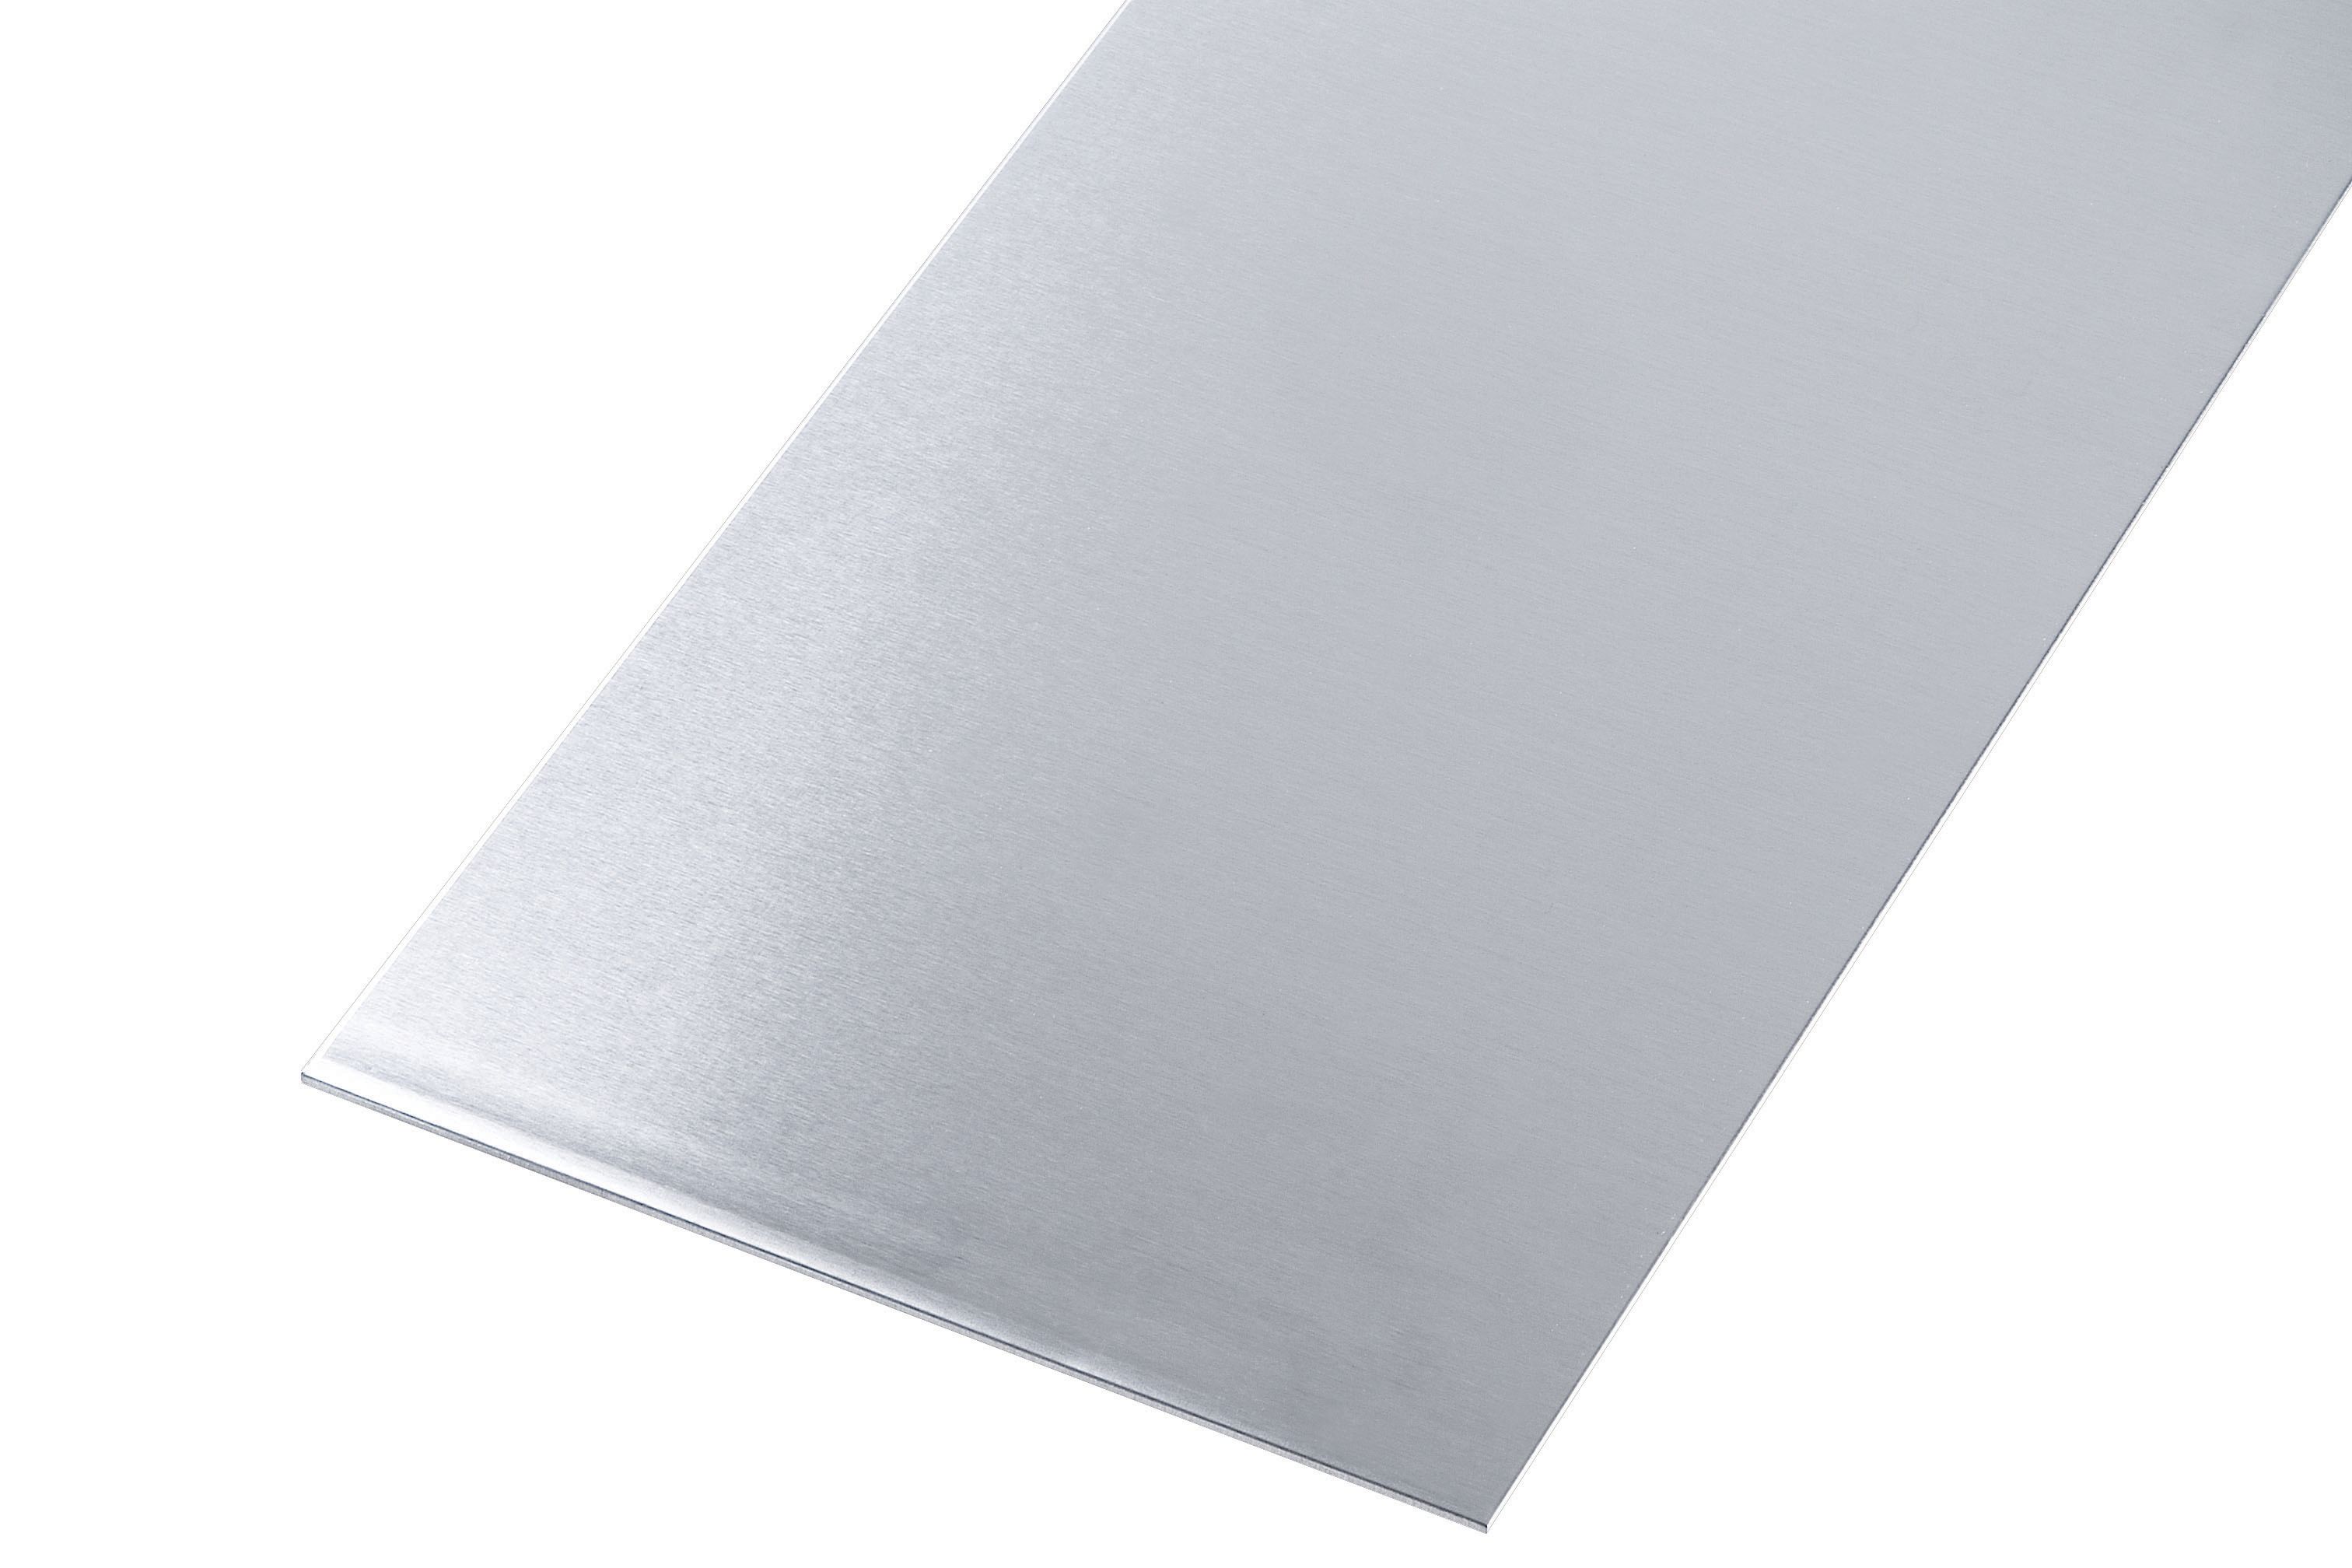 Image of Wickes Metal Sheet Aluminium with Stainless Steel Effect Finish - 300 x 1m